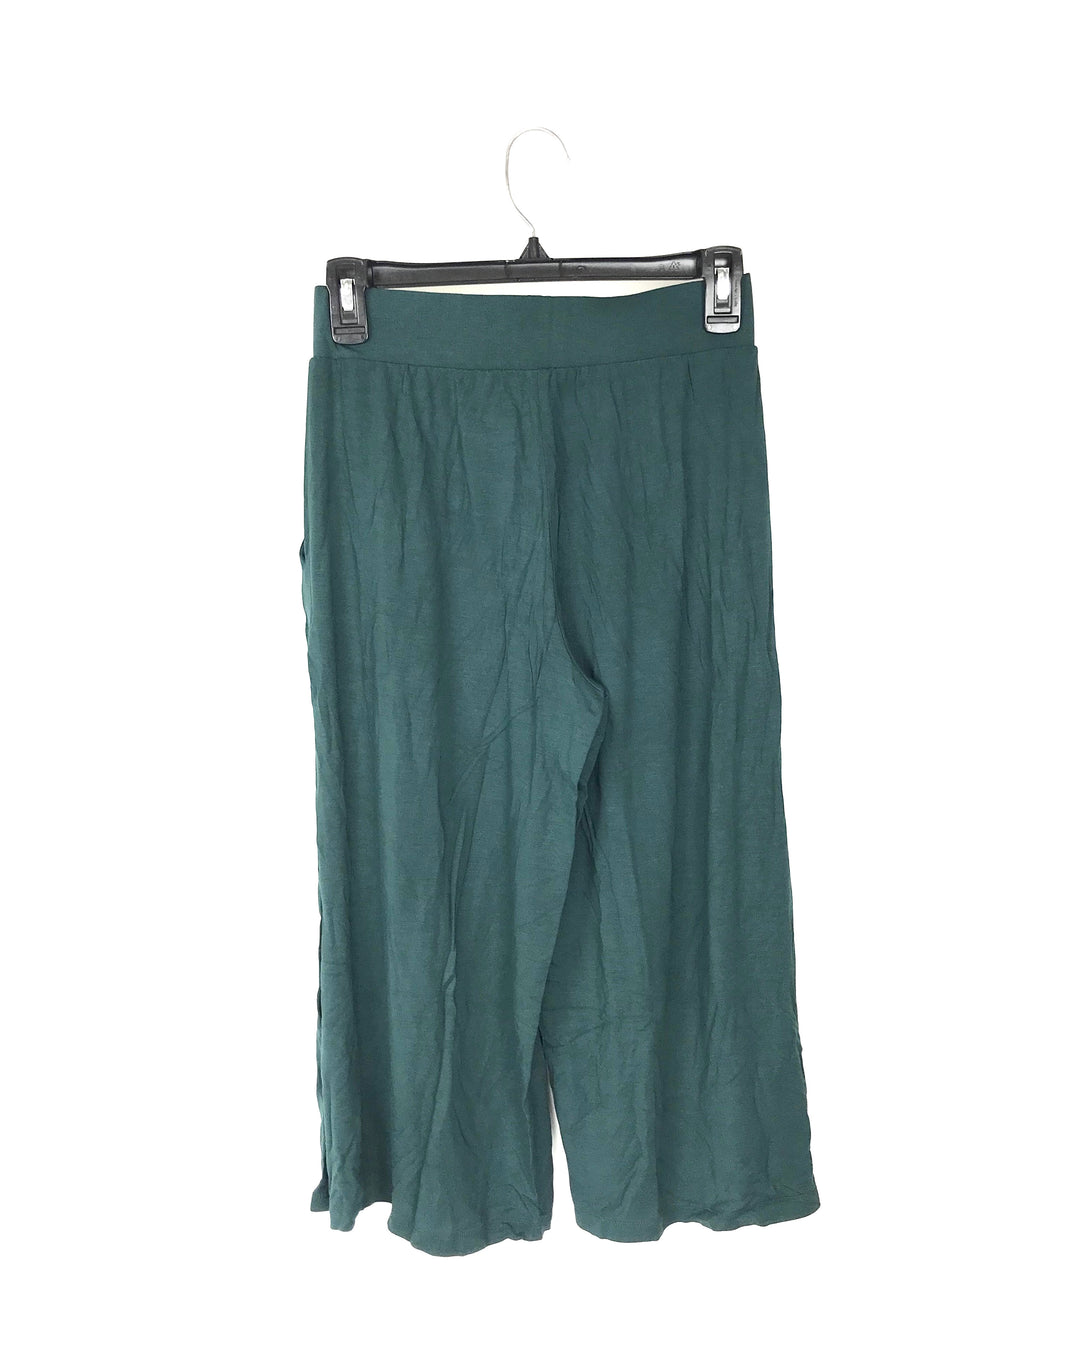 Emerald Green Cropped Sweat Pants - Petite 1X and 1X